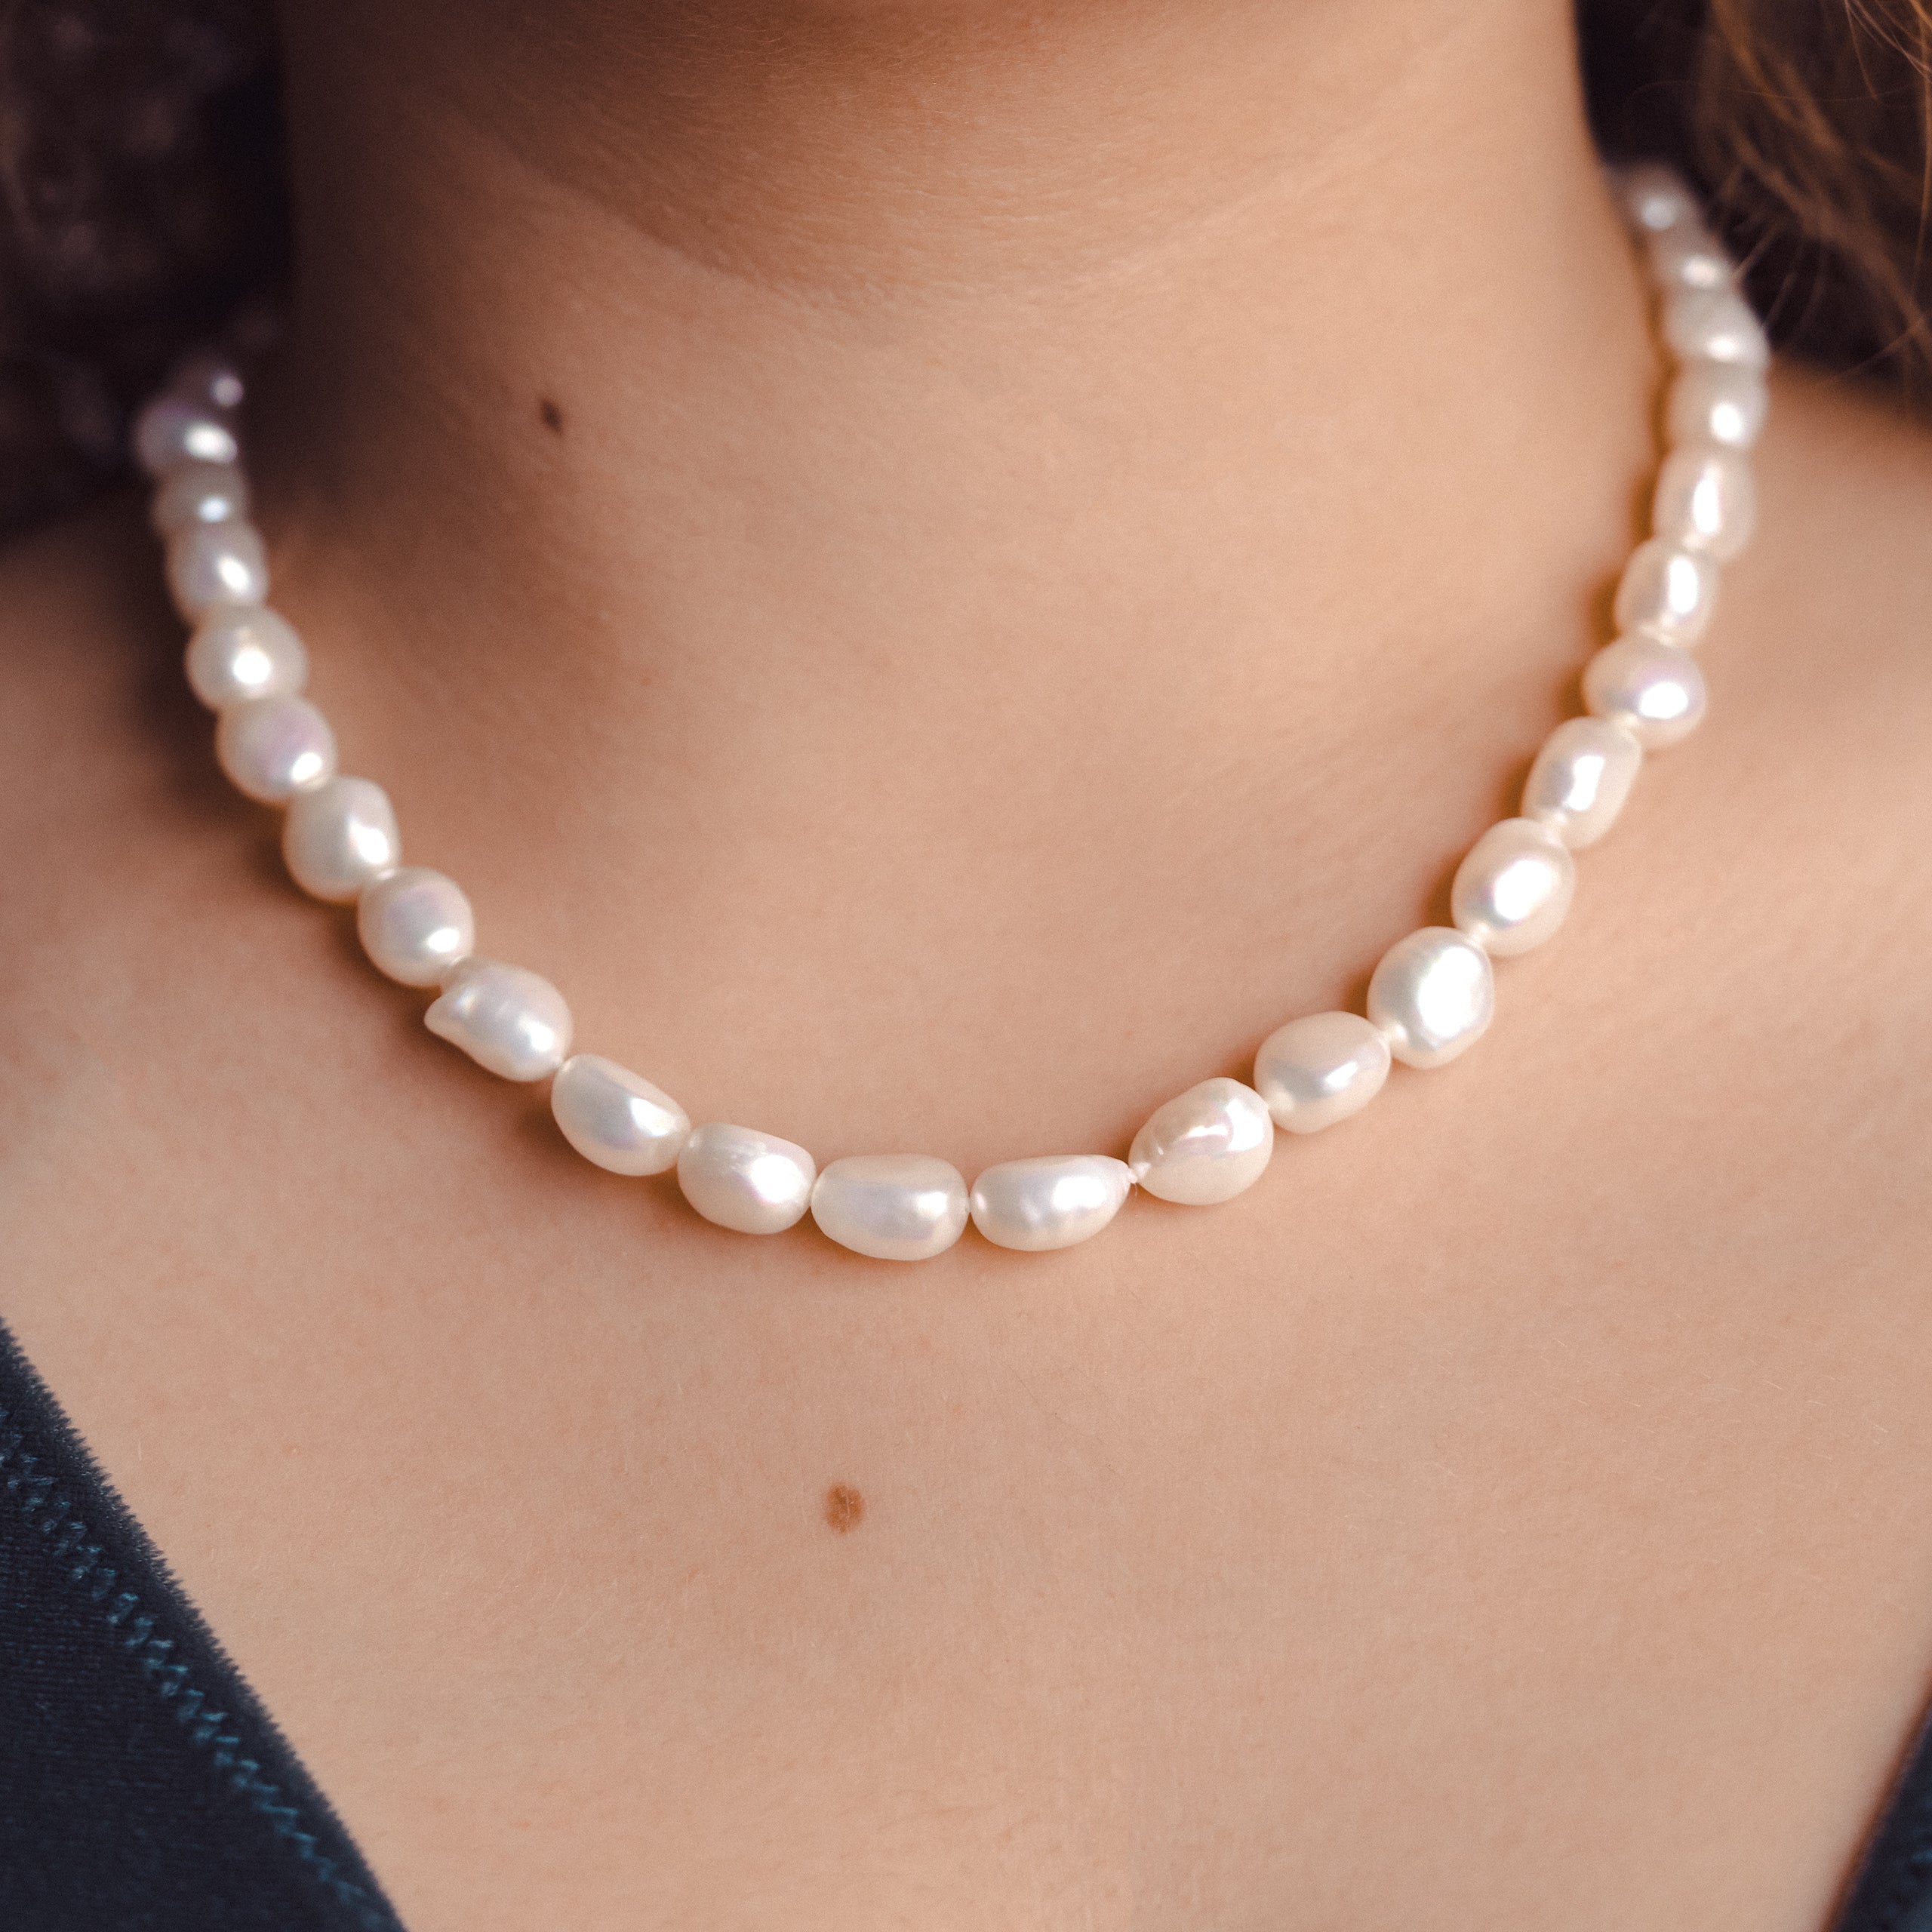 Baroque Freshwater Cultured Pearl Necklace 10-11 mm and 42 cm long